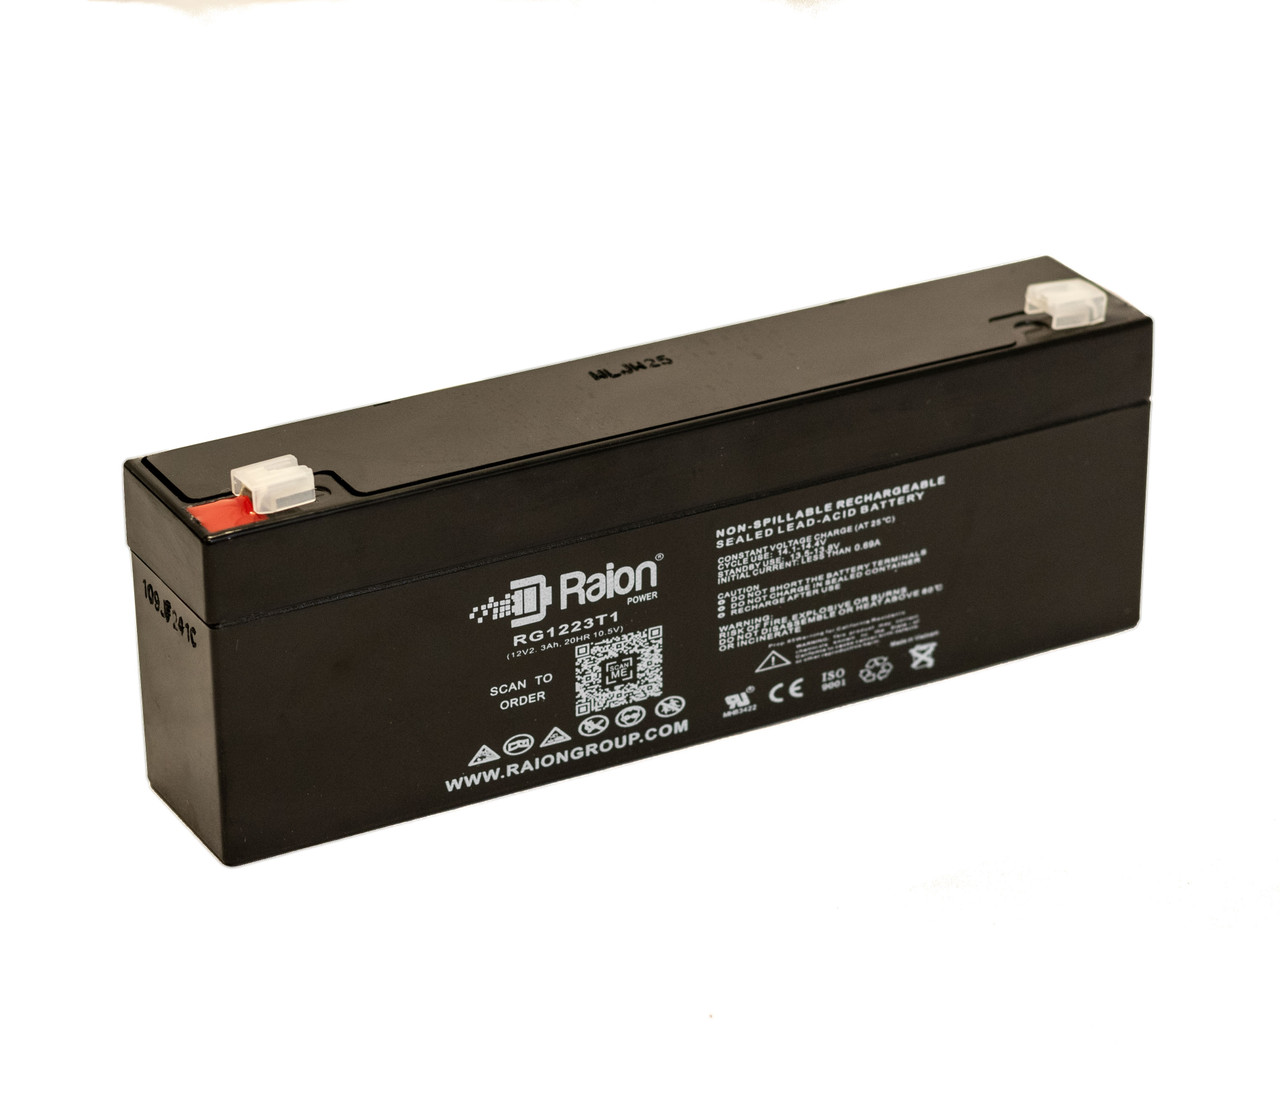 Raion Power RG1223T1 Replacement Battery for BPOWER BPE 2.3-12